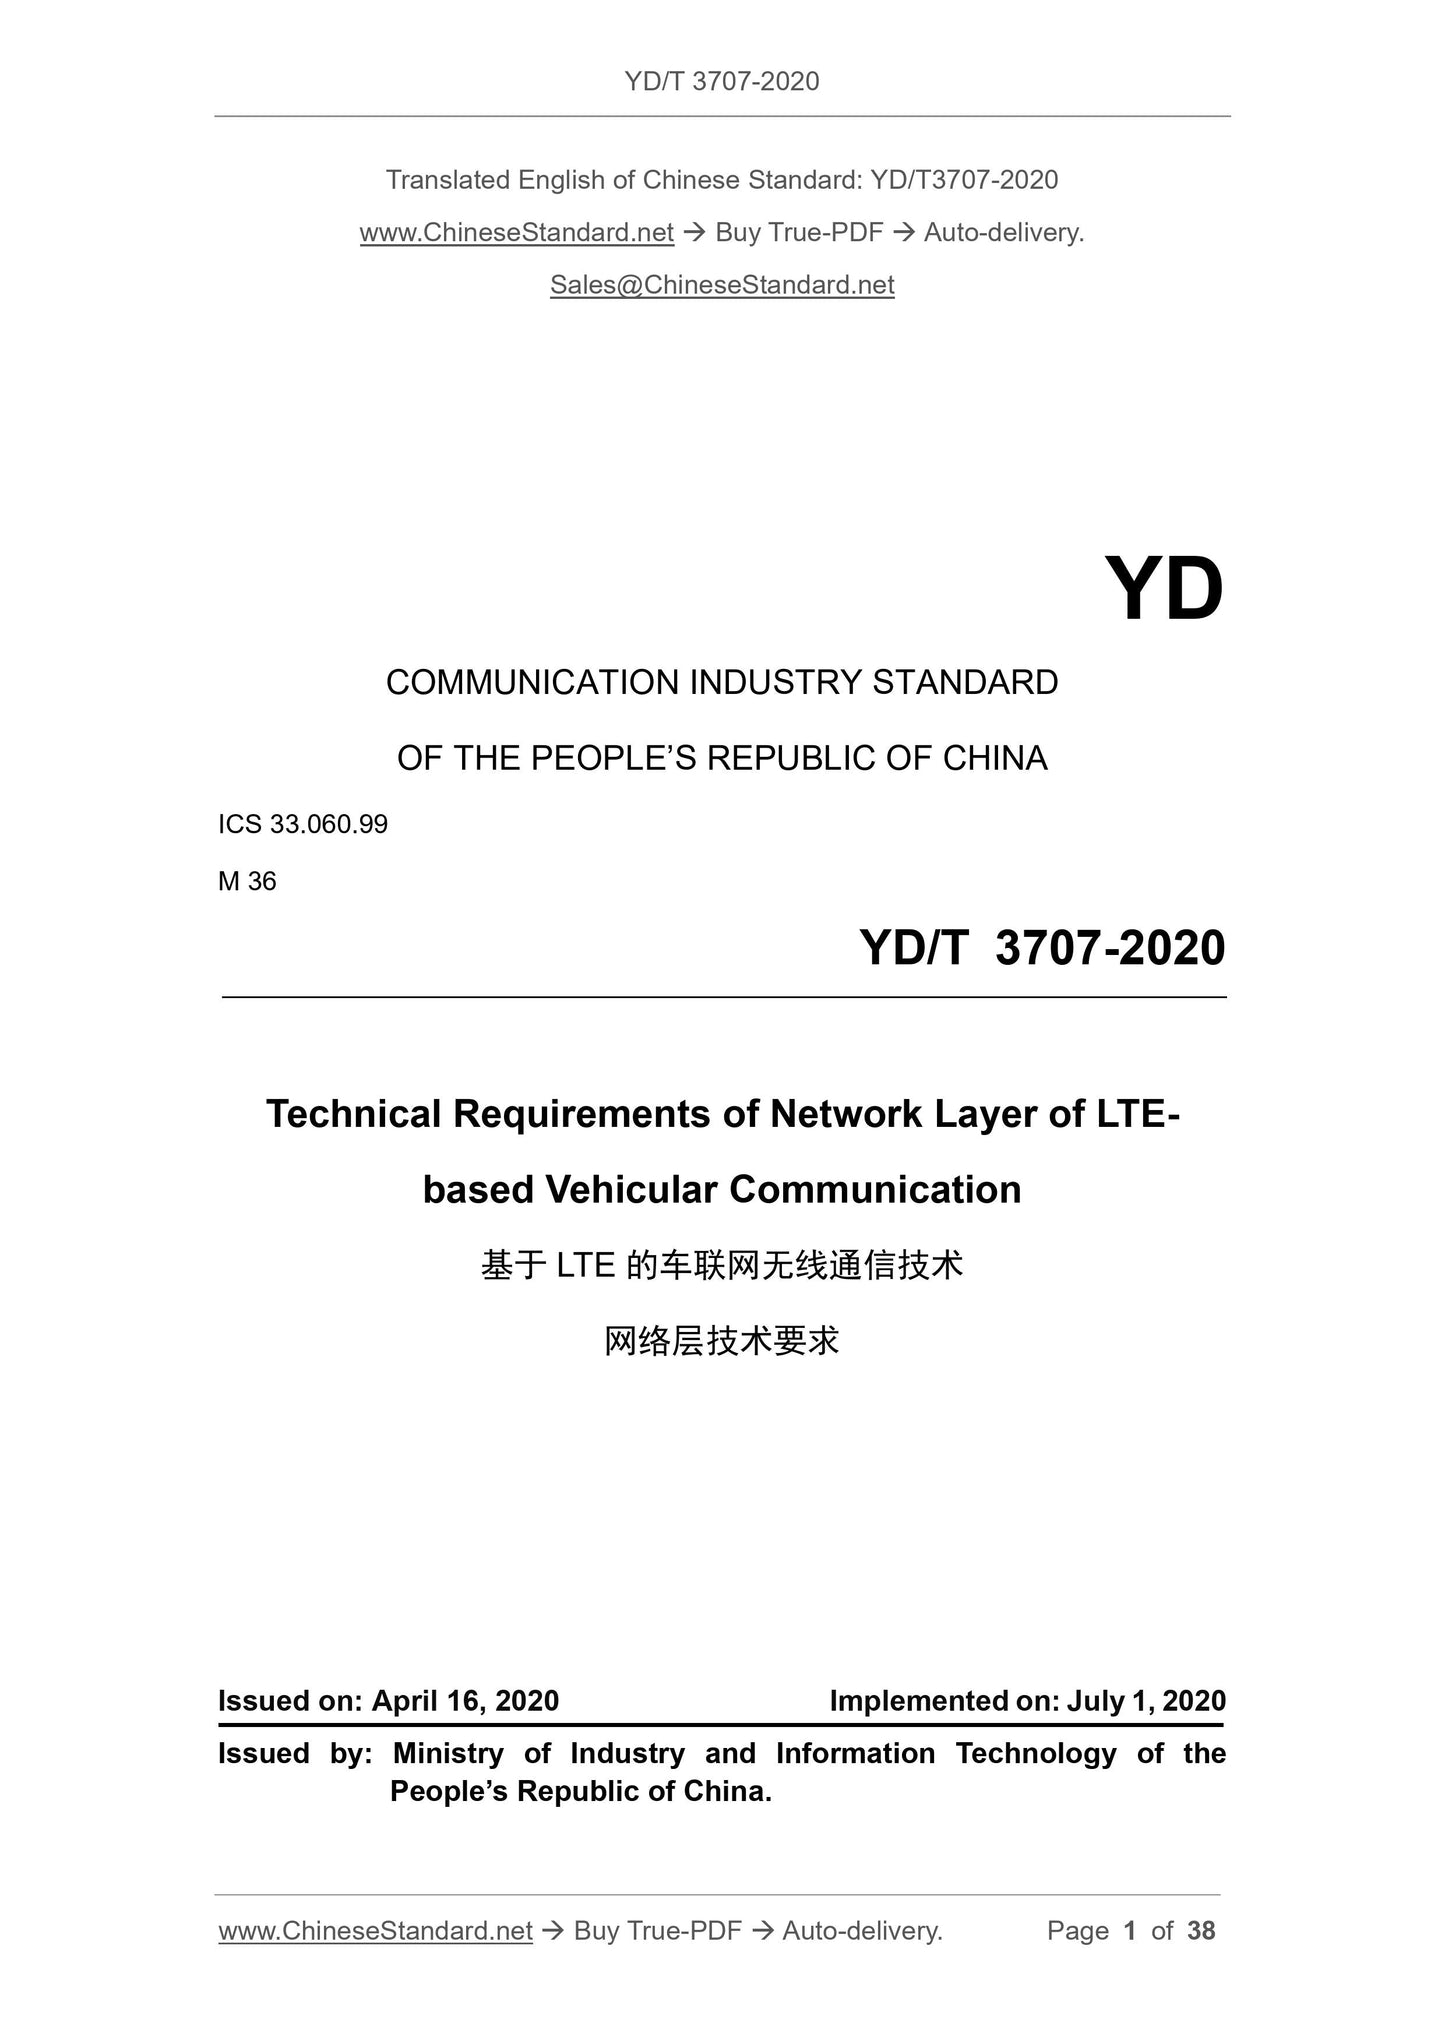 YD/T 3707-2020 Page 1